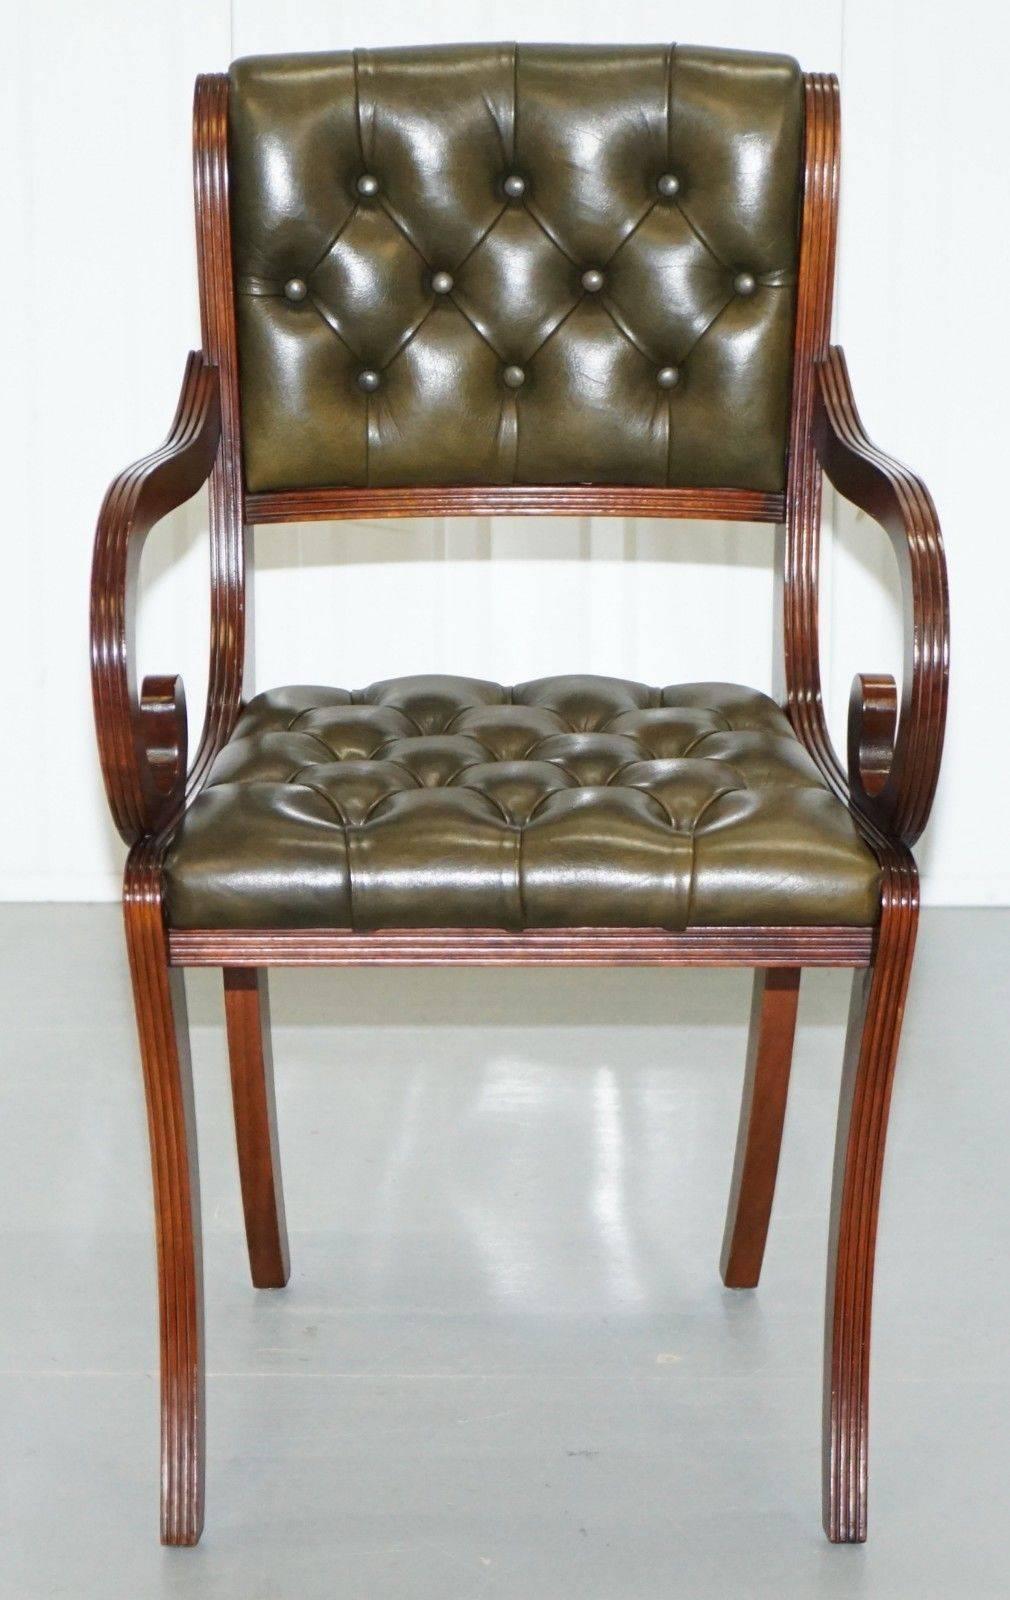 We are delighted to offer for sale this stunning set of eight Beresford & Hicks Chesterfield cattle hide leather mahogany framed dining chairs

Handmade in England using traditional methods, the chairs were made in the late 1960s and are based on